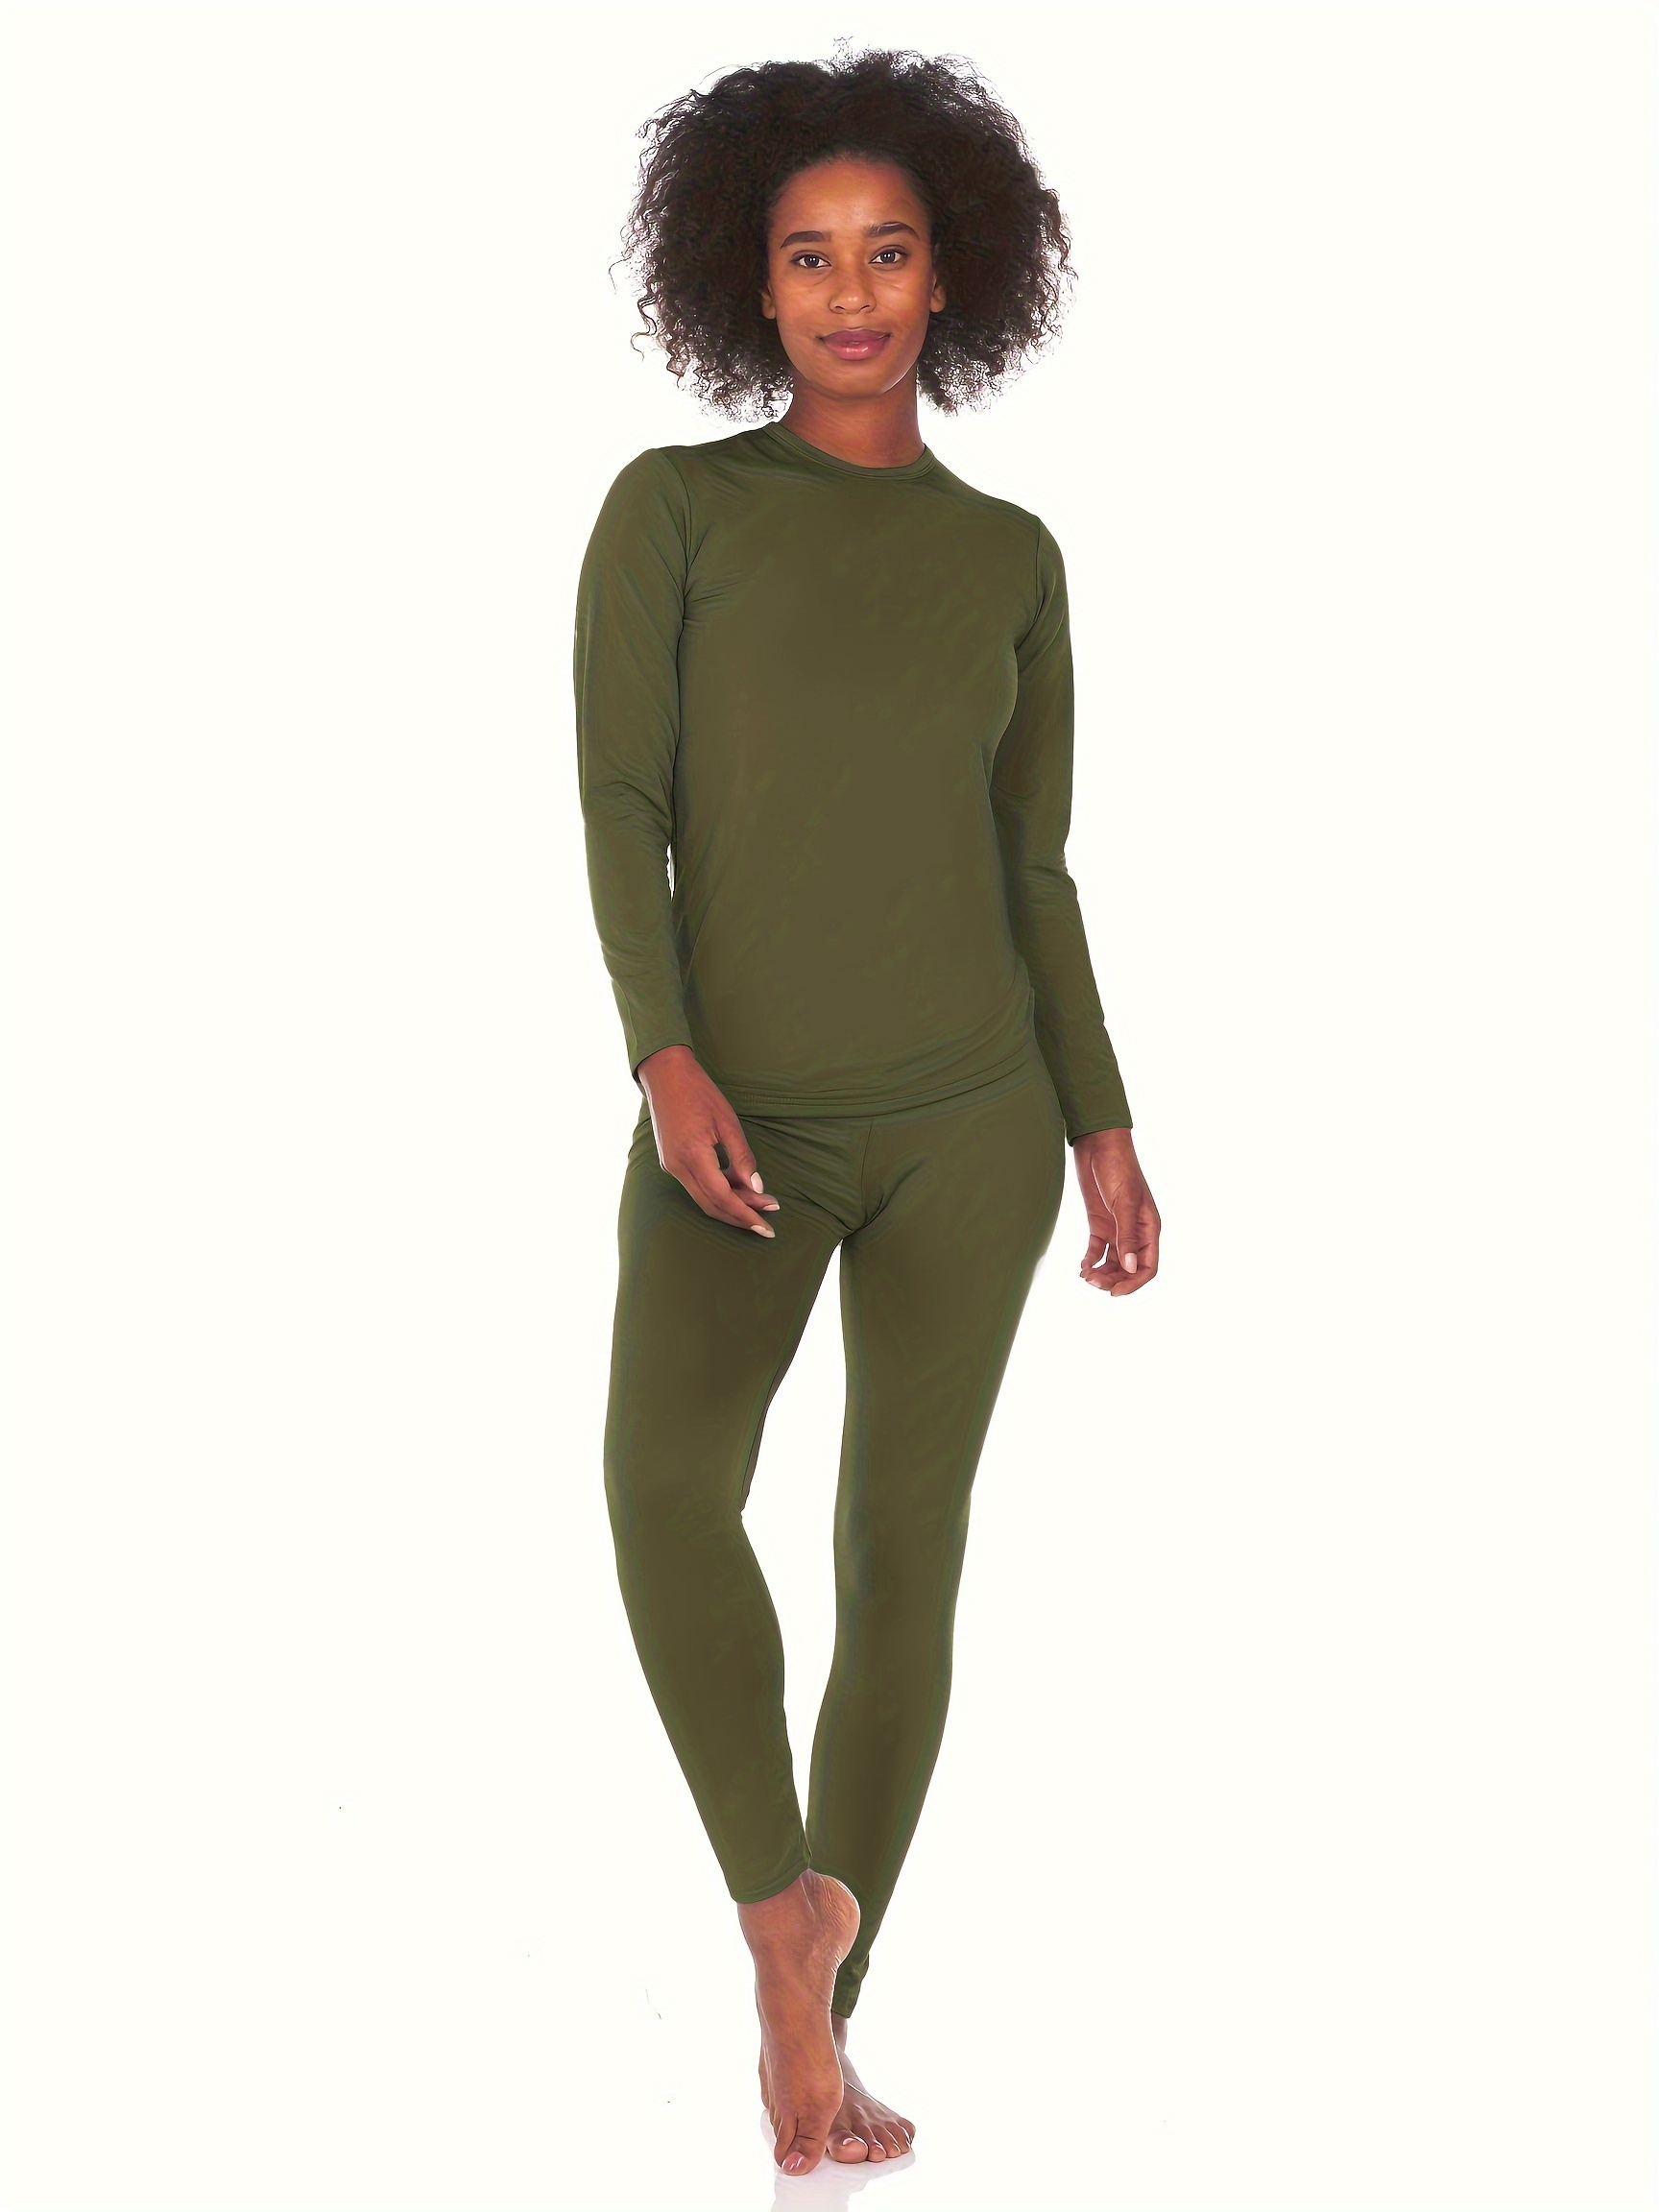 New Arrival Women's Thermal Underwear Set, Long Sleeve Top And